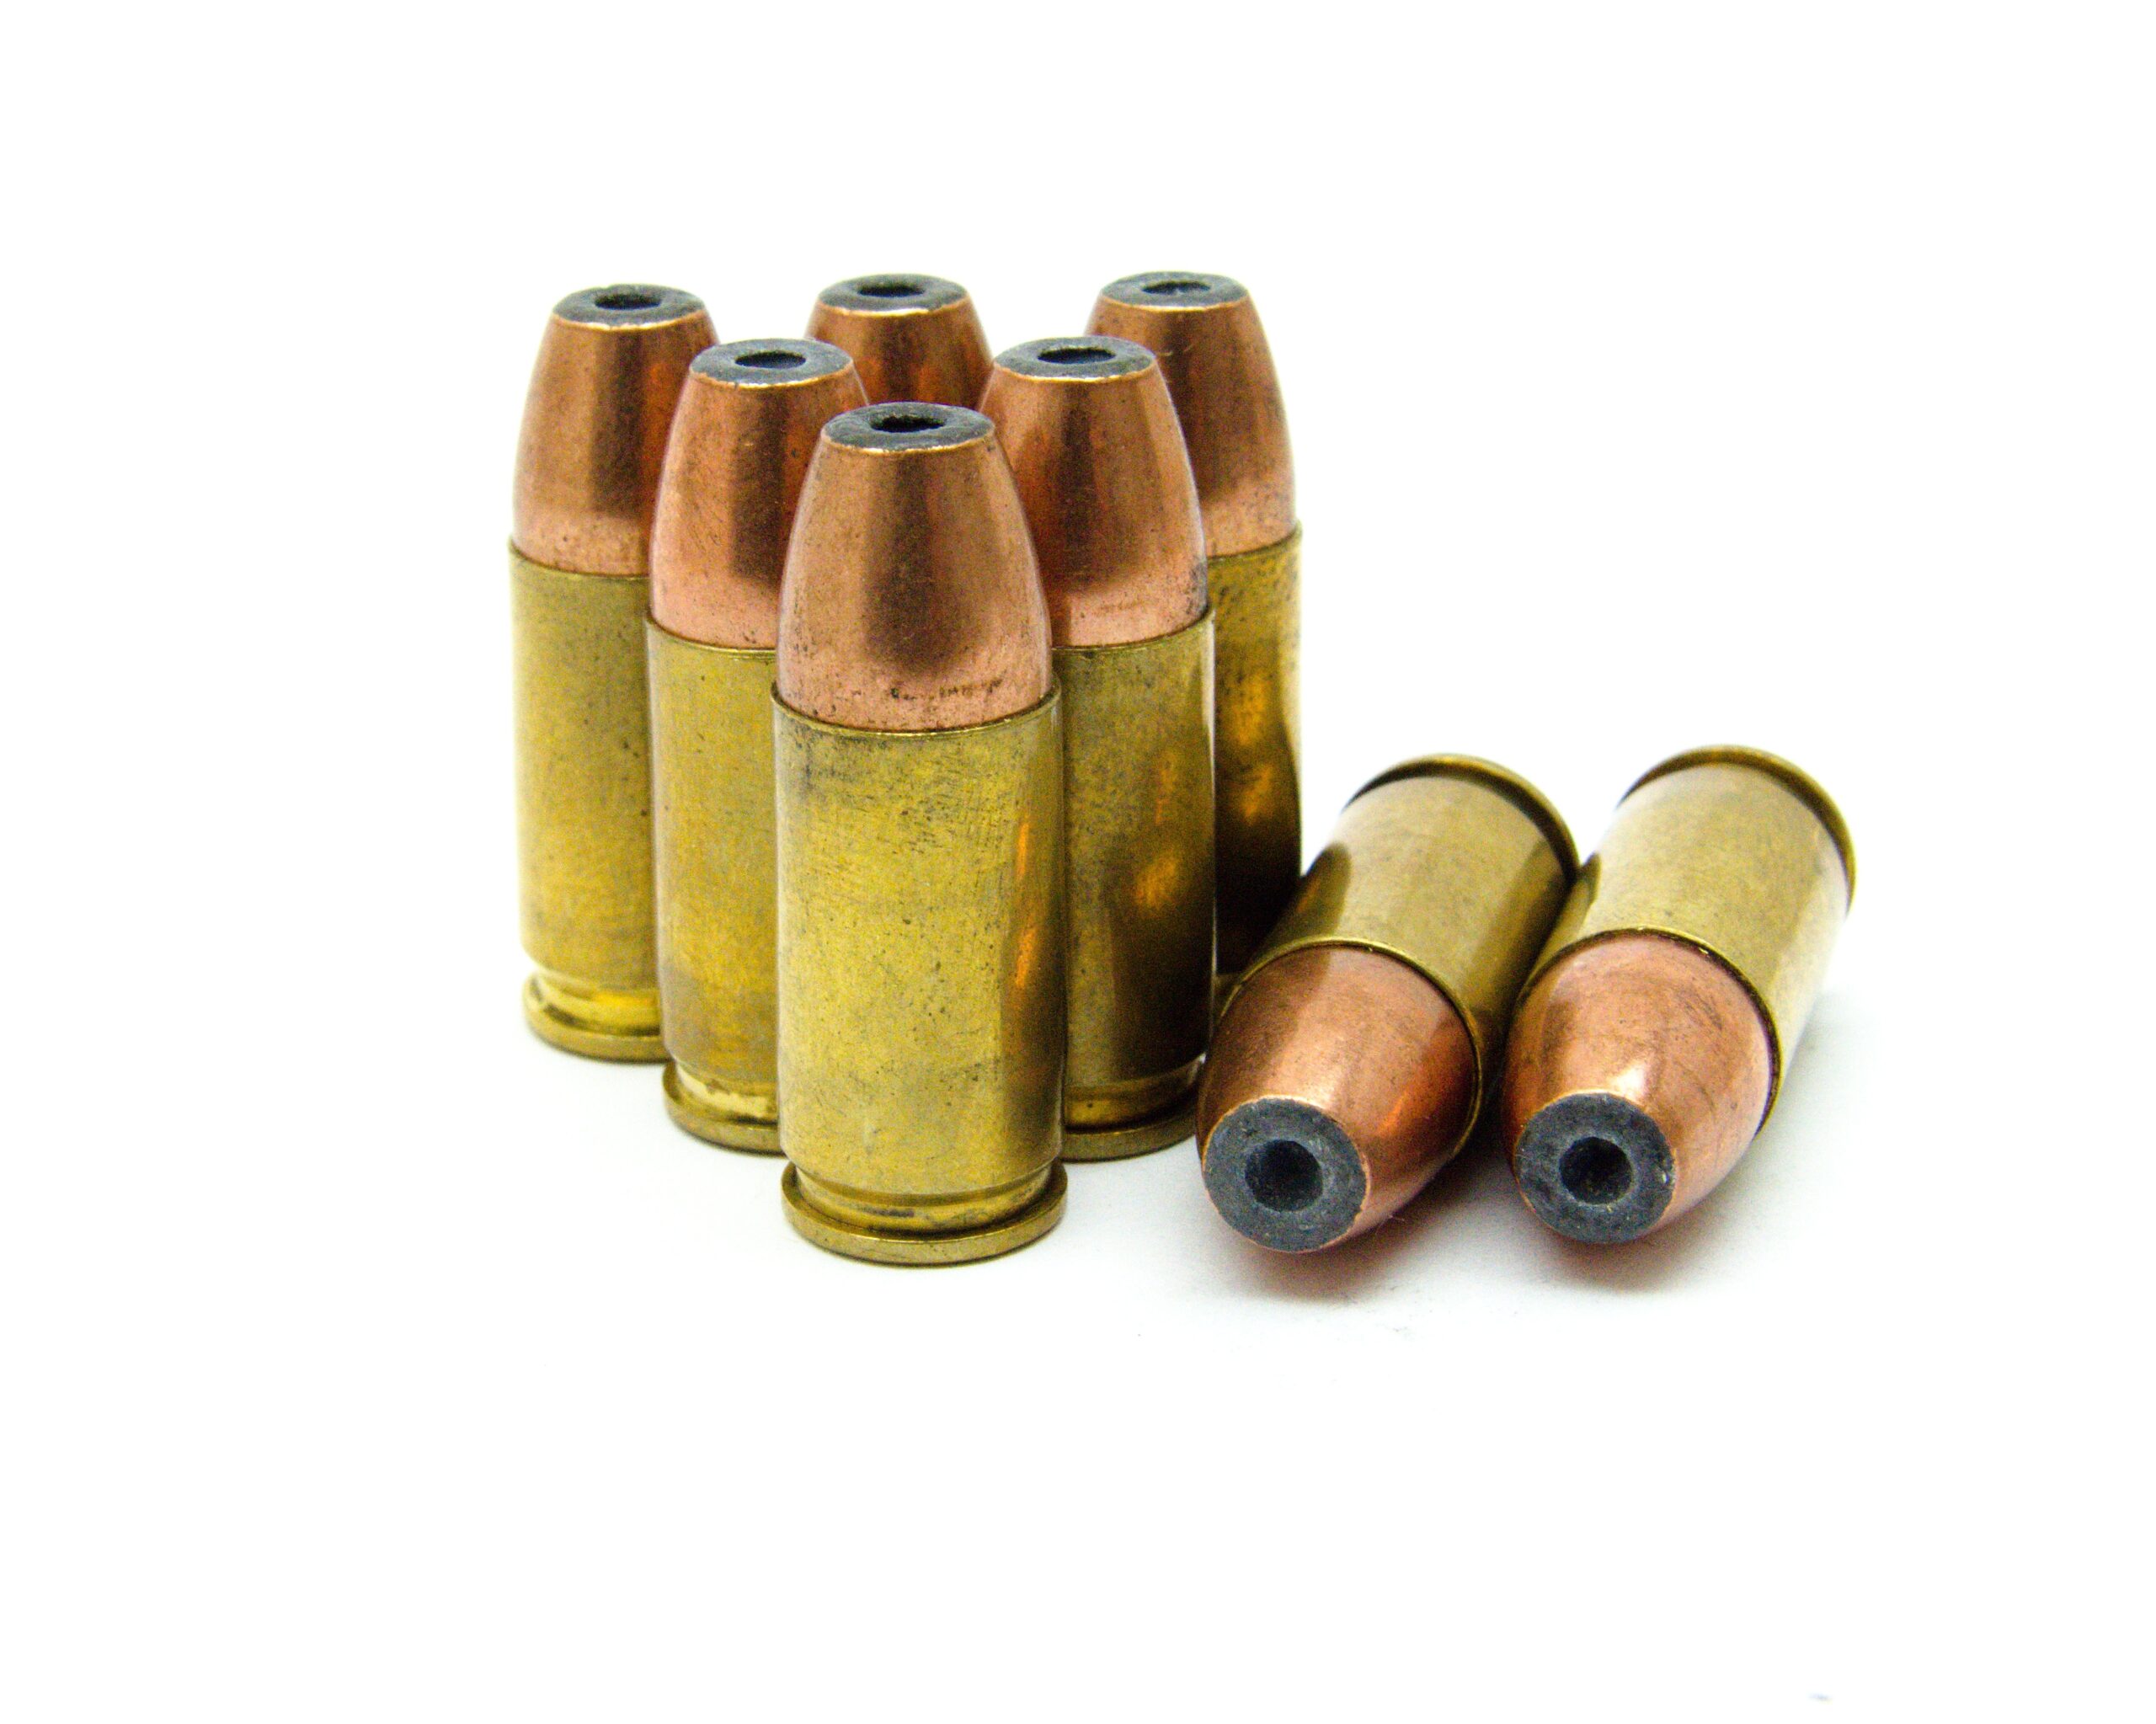 9mm Luger Ammunition with 115 Grain Speer Gold Dot Hollow Point Bullets ...